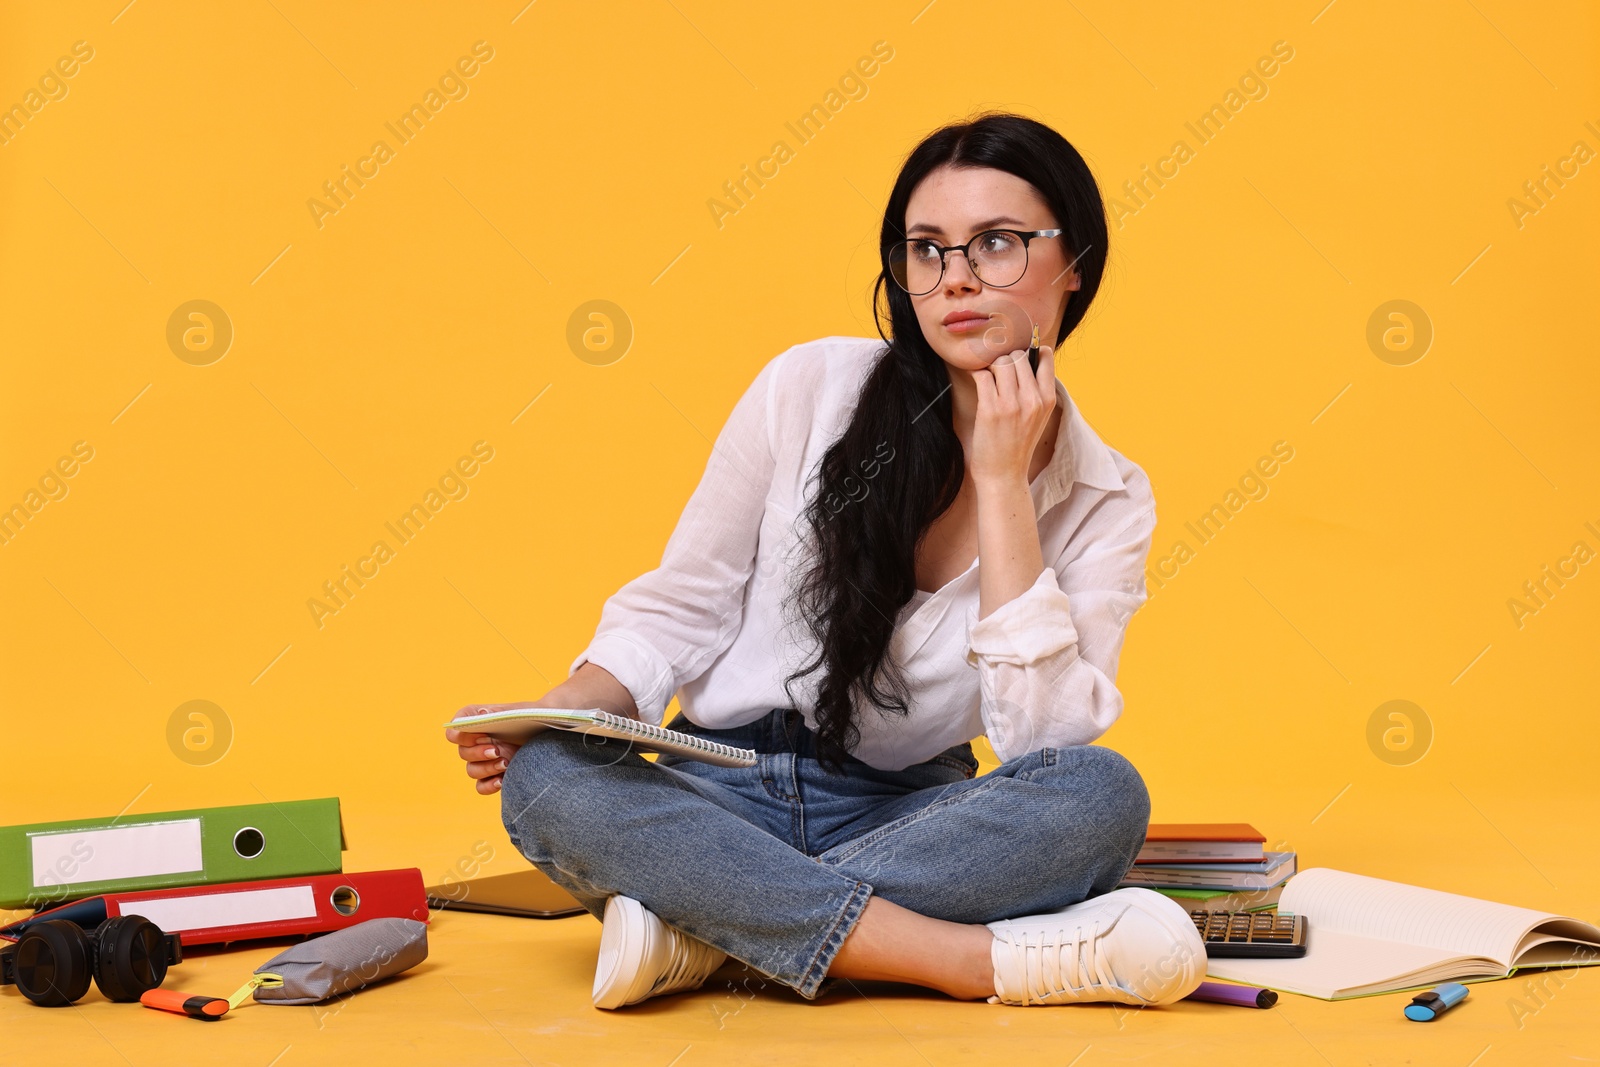 Photo of Student with notebook sitting among books and stationery on yellow background